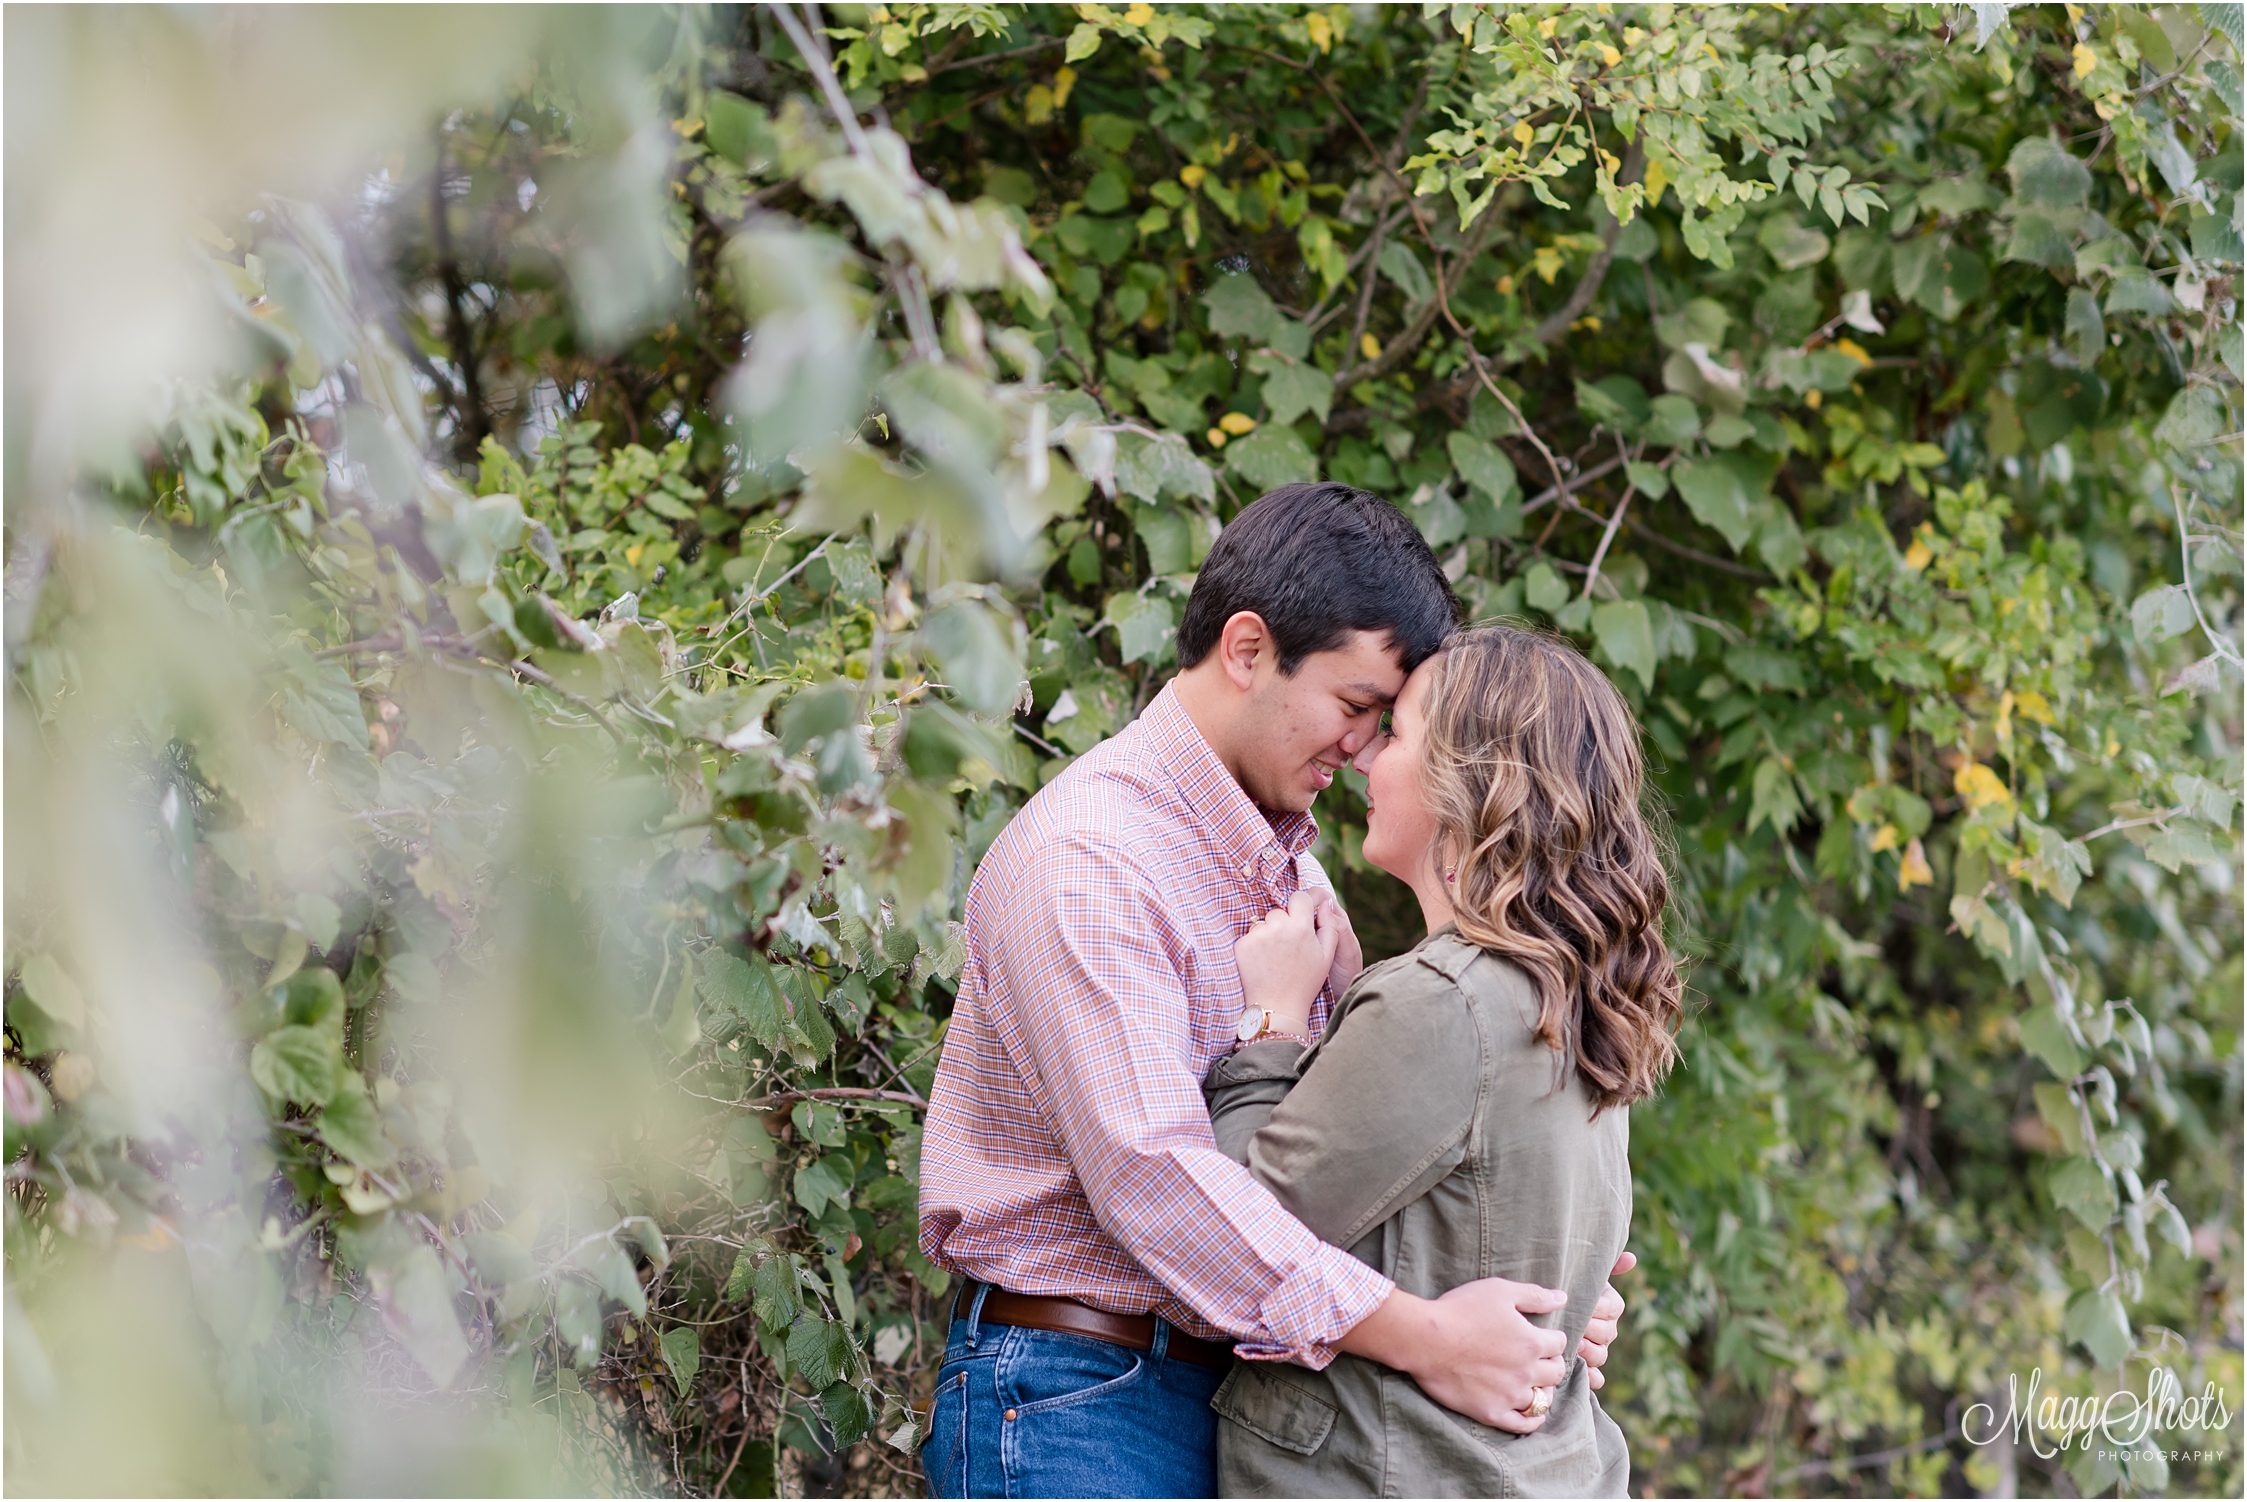 Engagements, Love, Bride and Groom, Green, Engaged, Wedding, MaggShots Photography, MaggShots, Professional Photographer, Porfessional Photography, DFW Wedding Photographer,